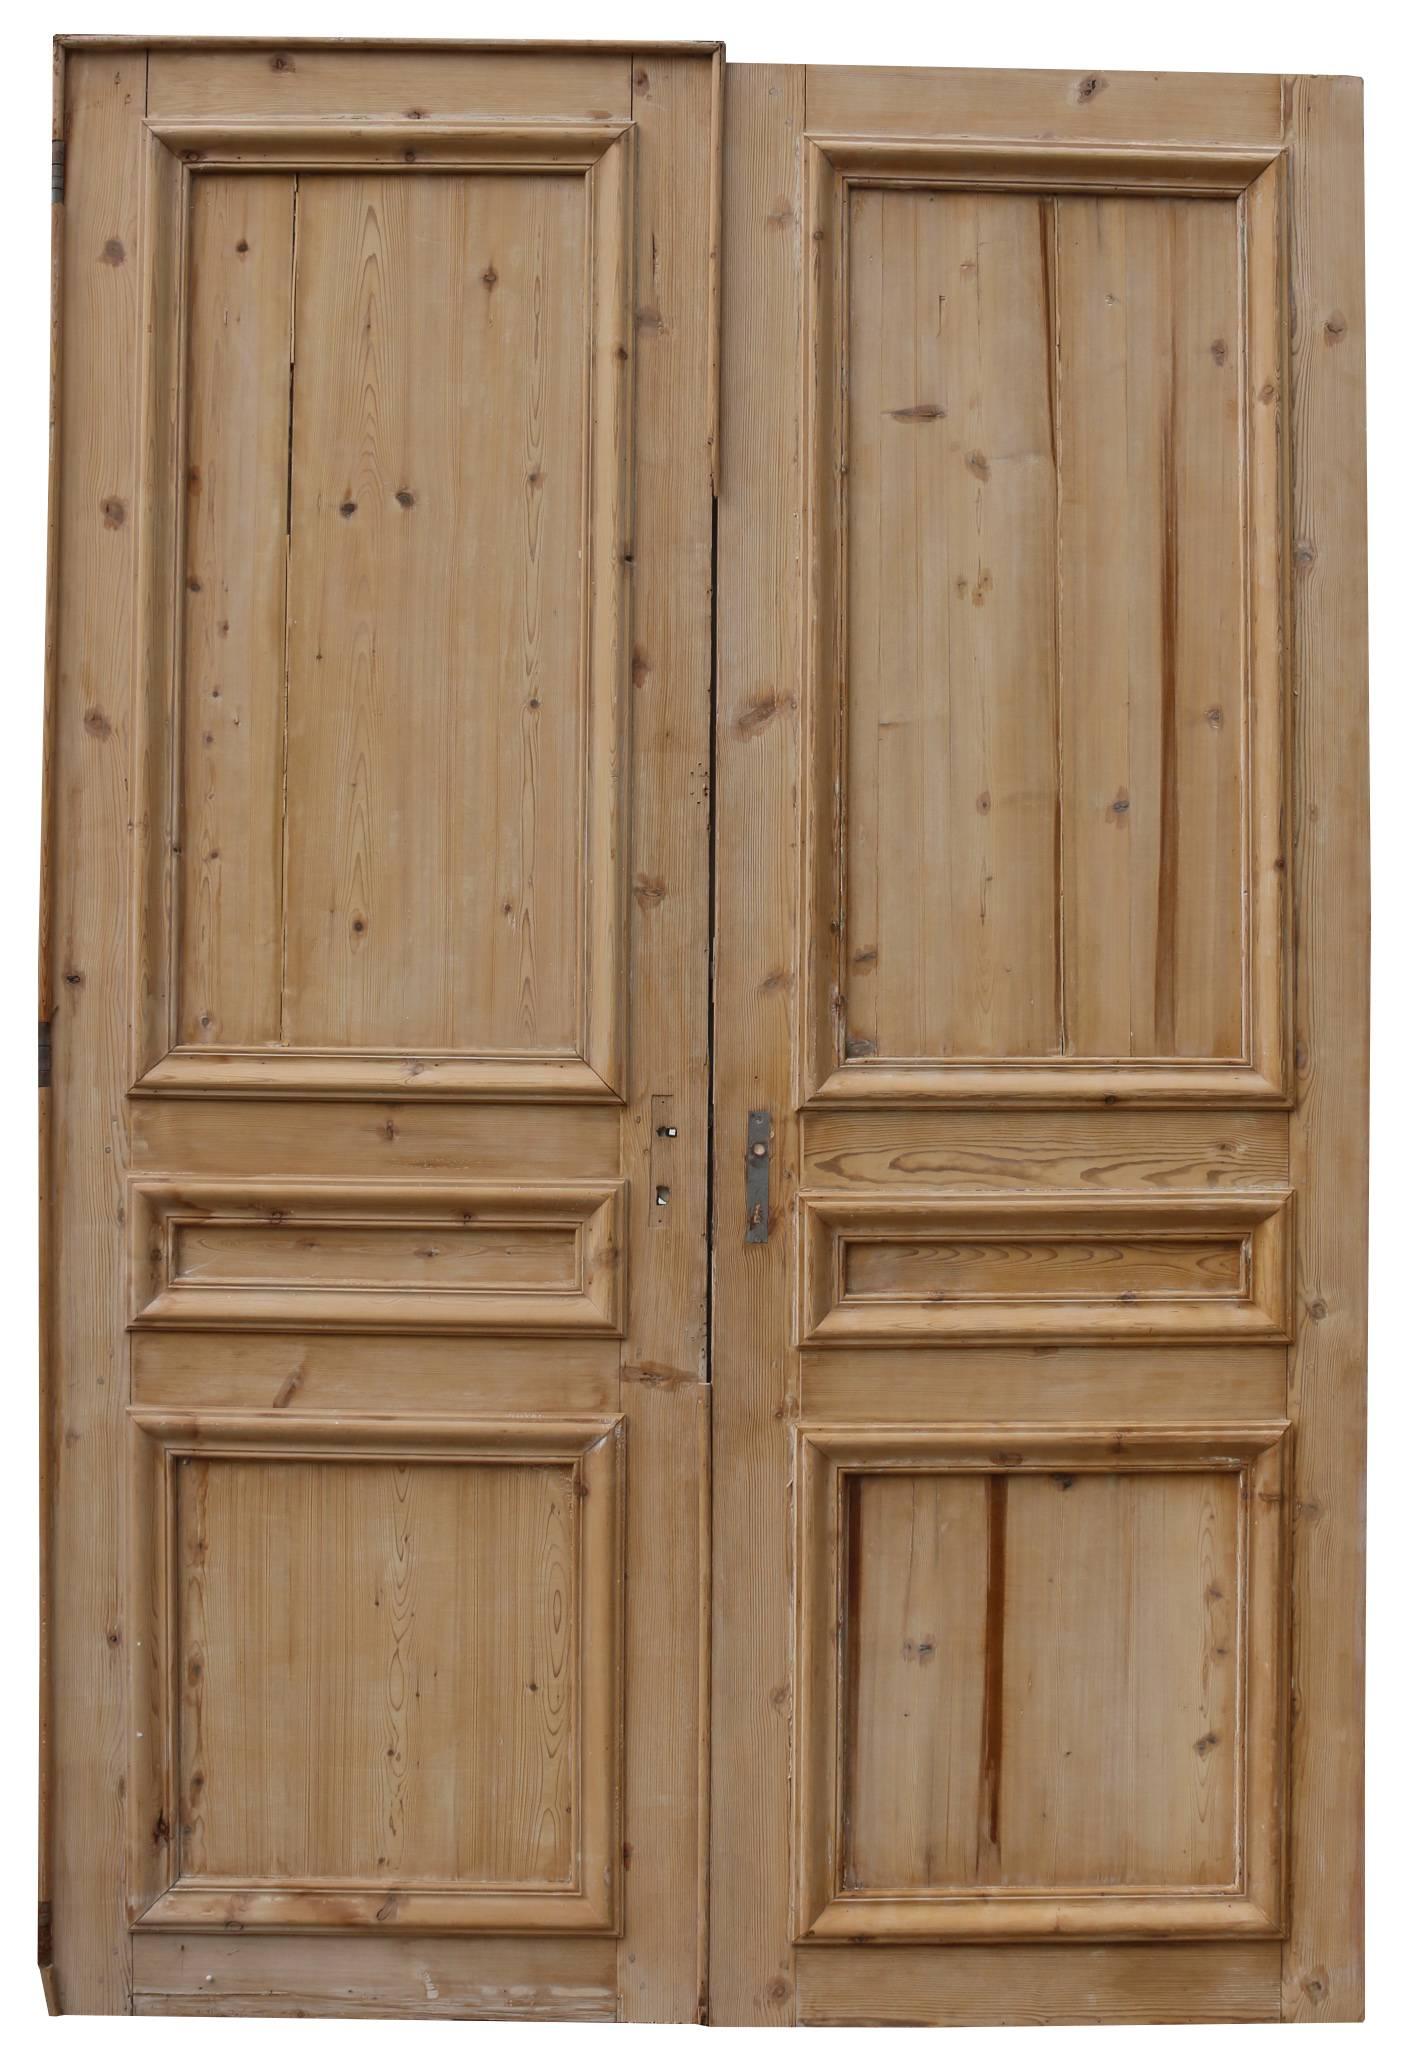 Pair of antique stripped pine French double doors. Measure: Weight 33 kg each
The width listed is for each door.